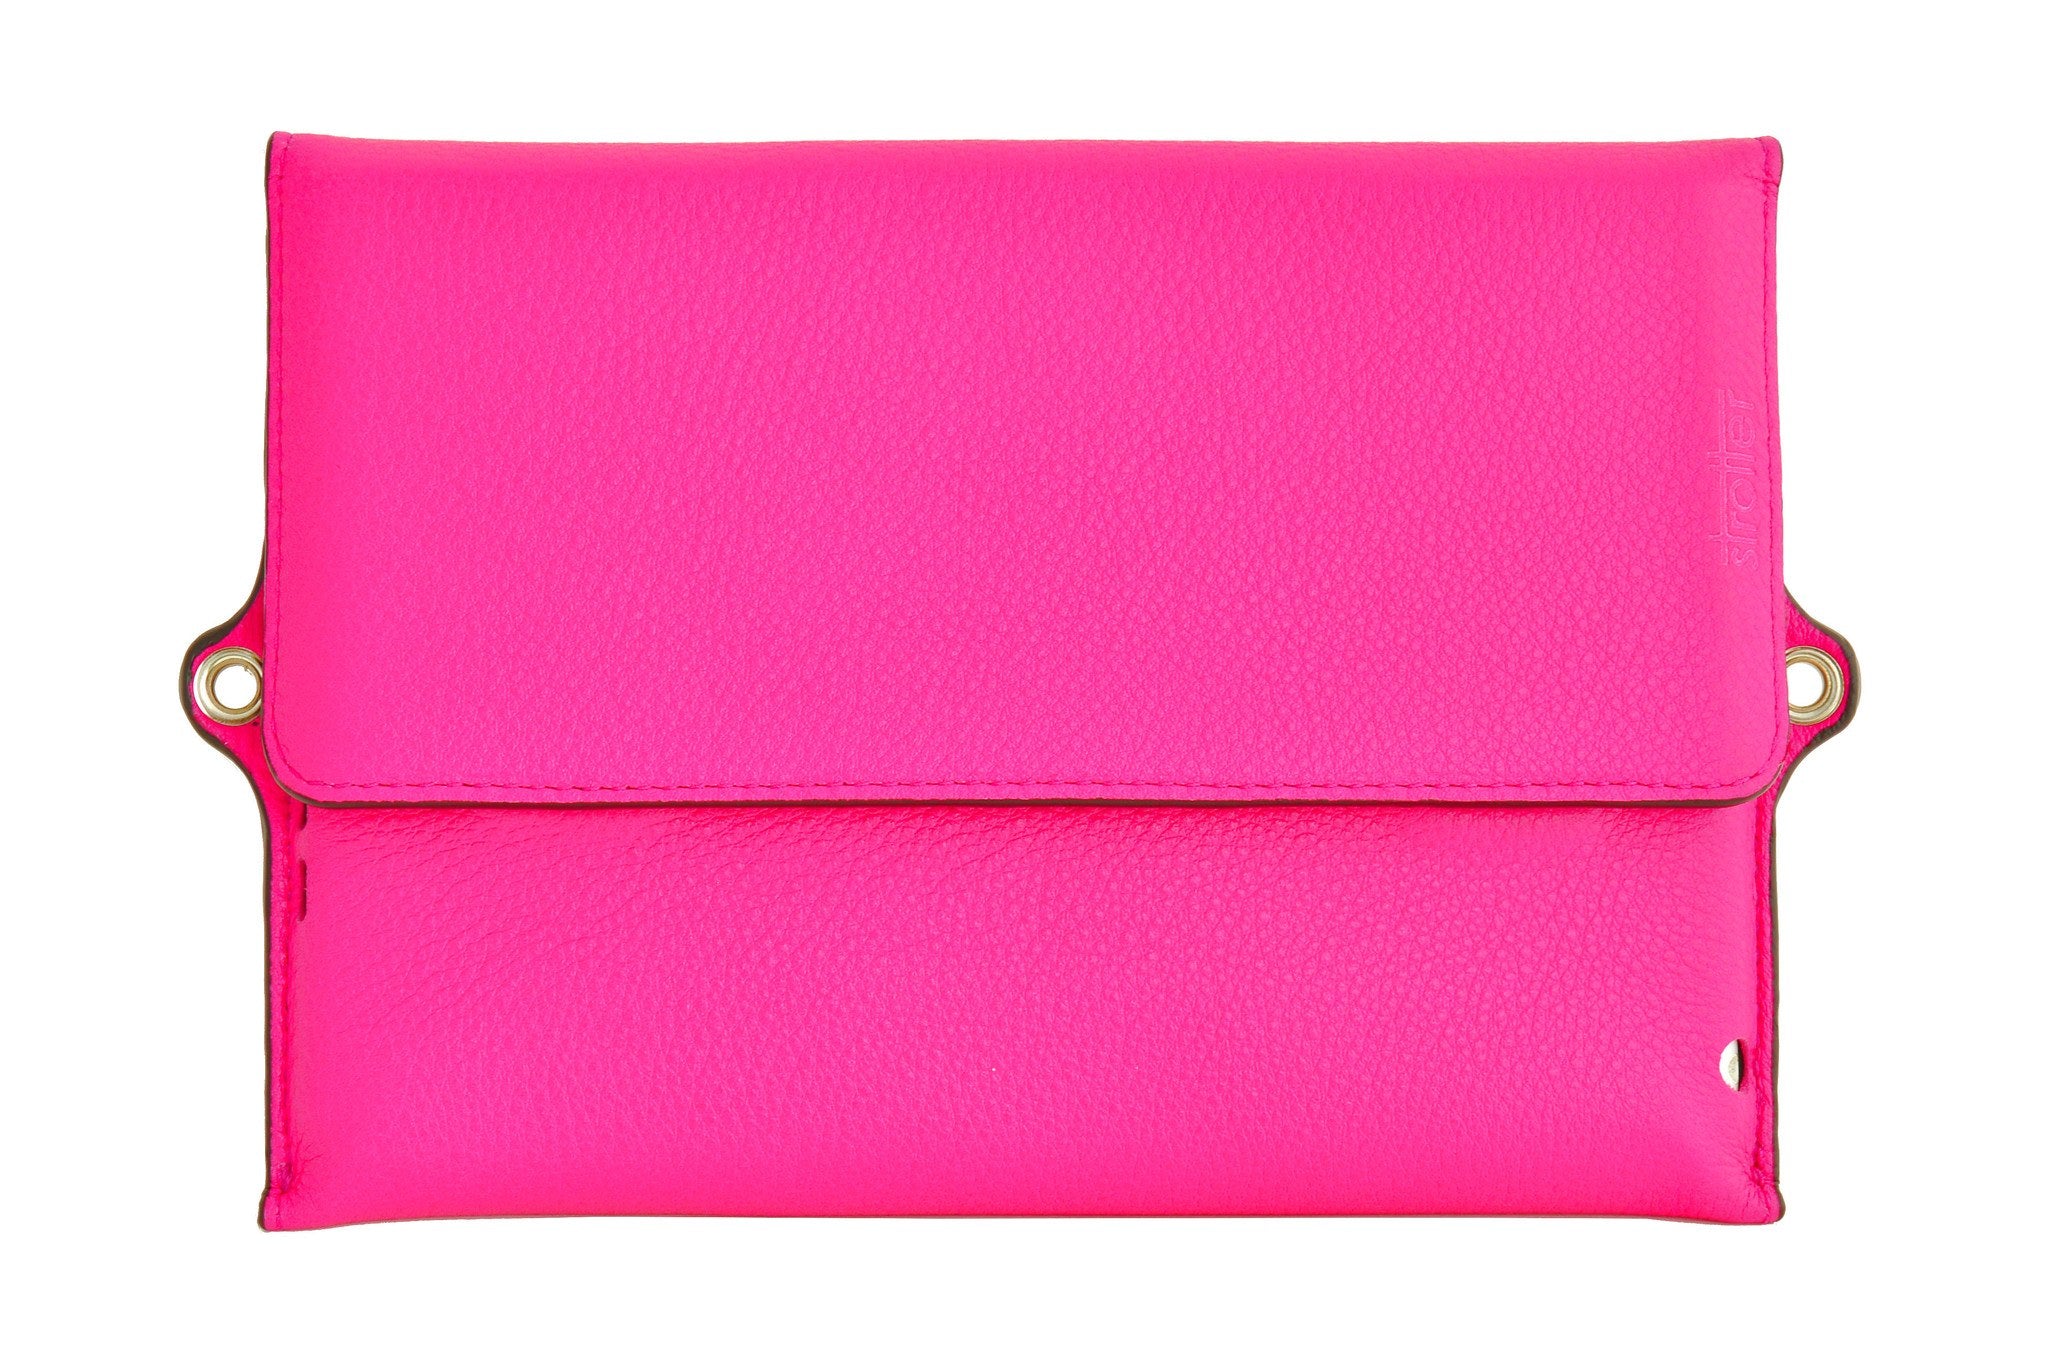 Case for iPad Mini - Across GL (genuine leather) in Super Pink.